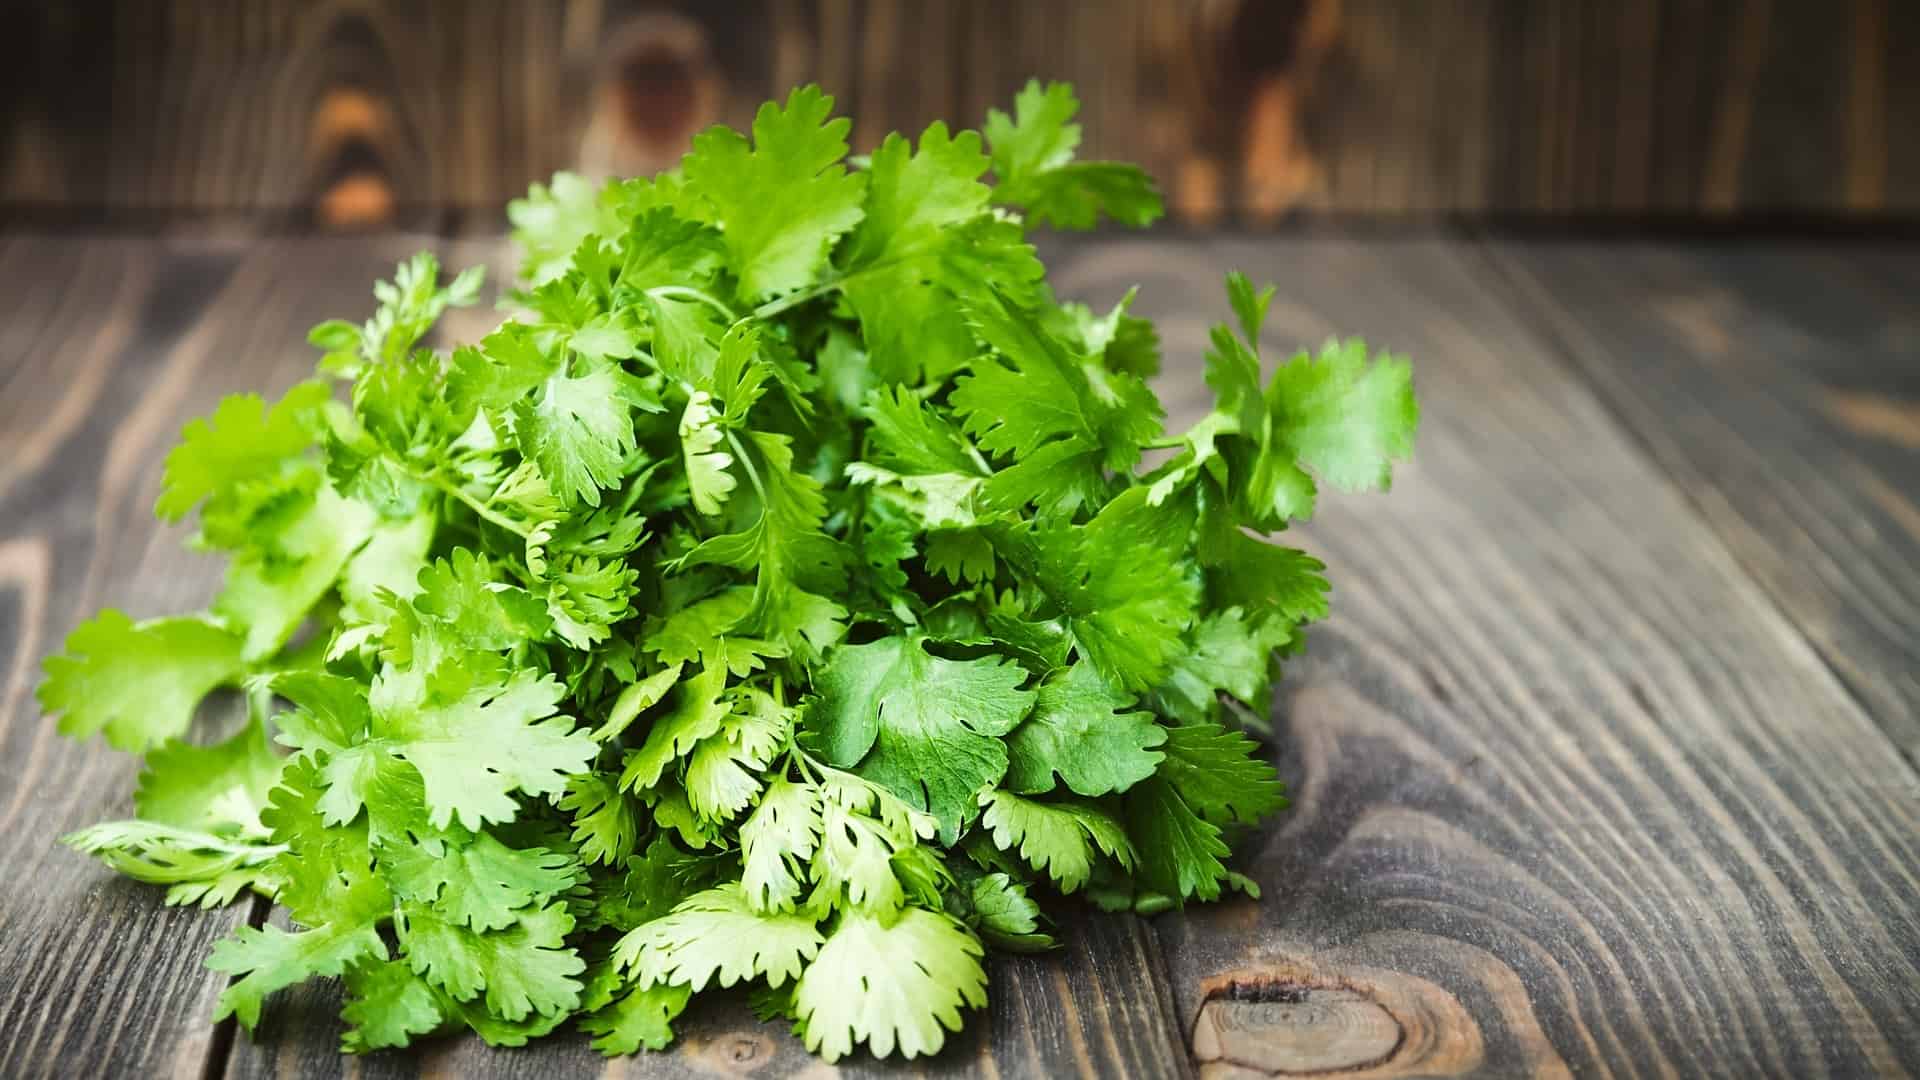 Cilantro (Coriander Leaves) Health Benefits- The Indian Med